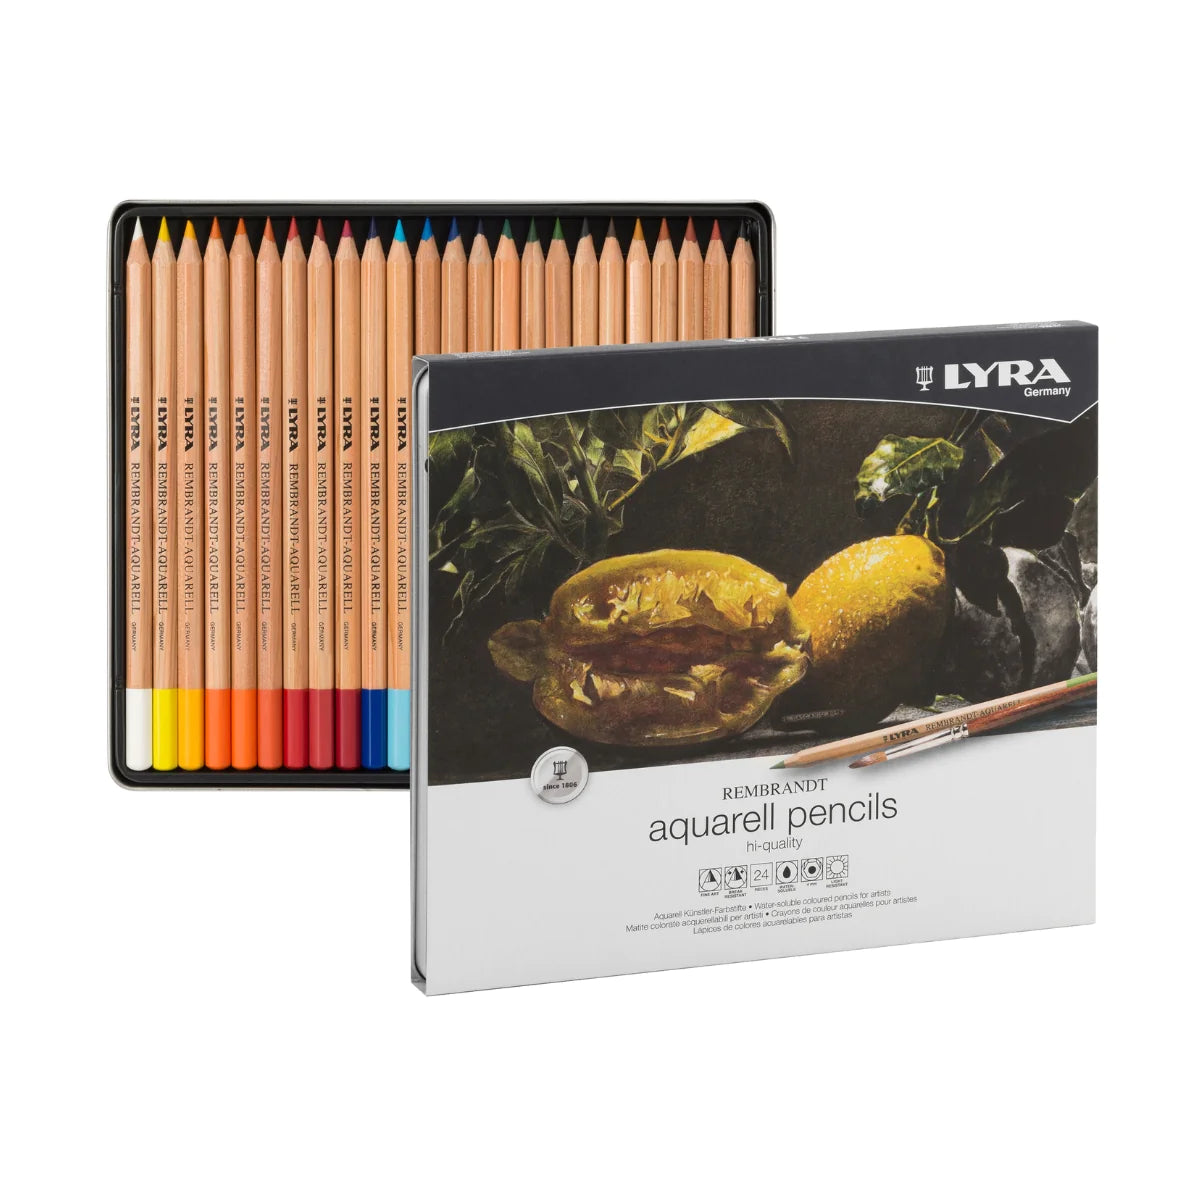  Lyra Groove Triple 1, Crayon 72 Stifte : Toys & Games